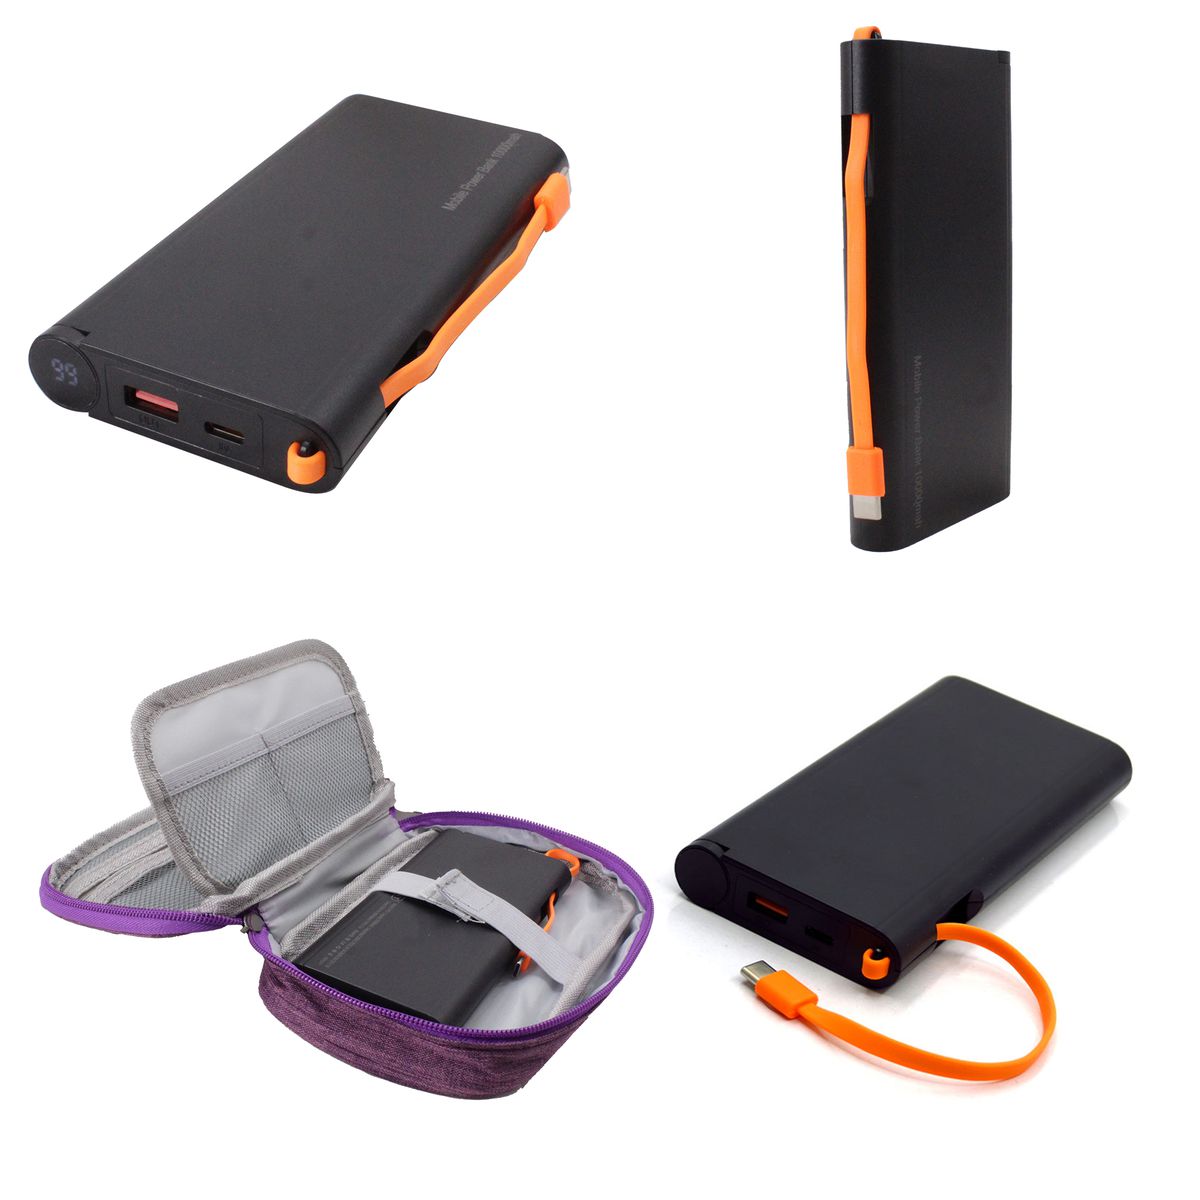 10000mAh 100W Fast-Charge Power Bank with Extractable Cable & Carry Pouch